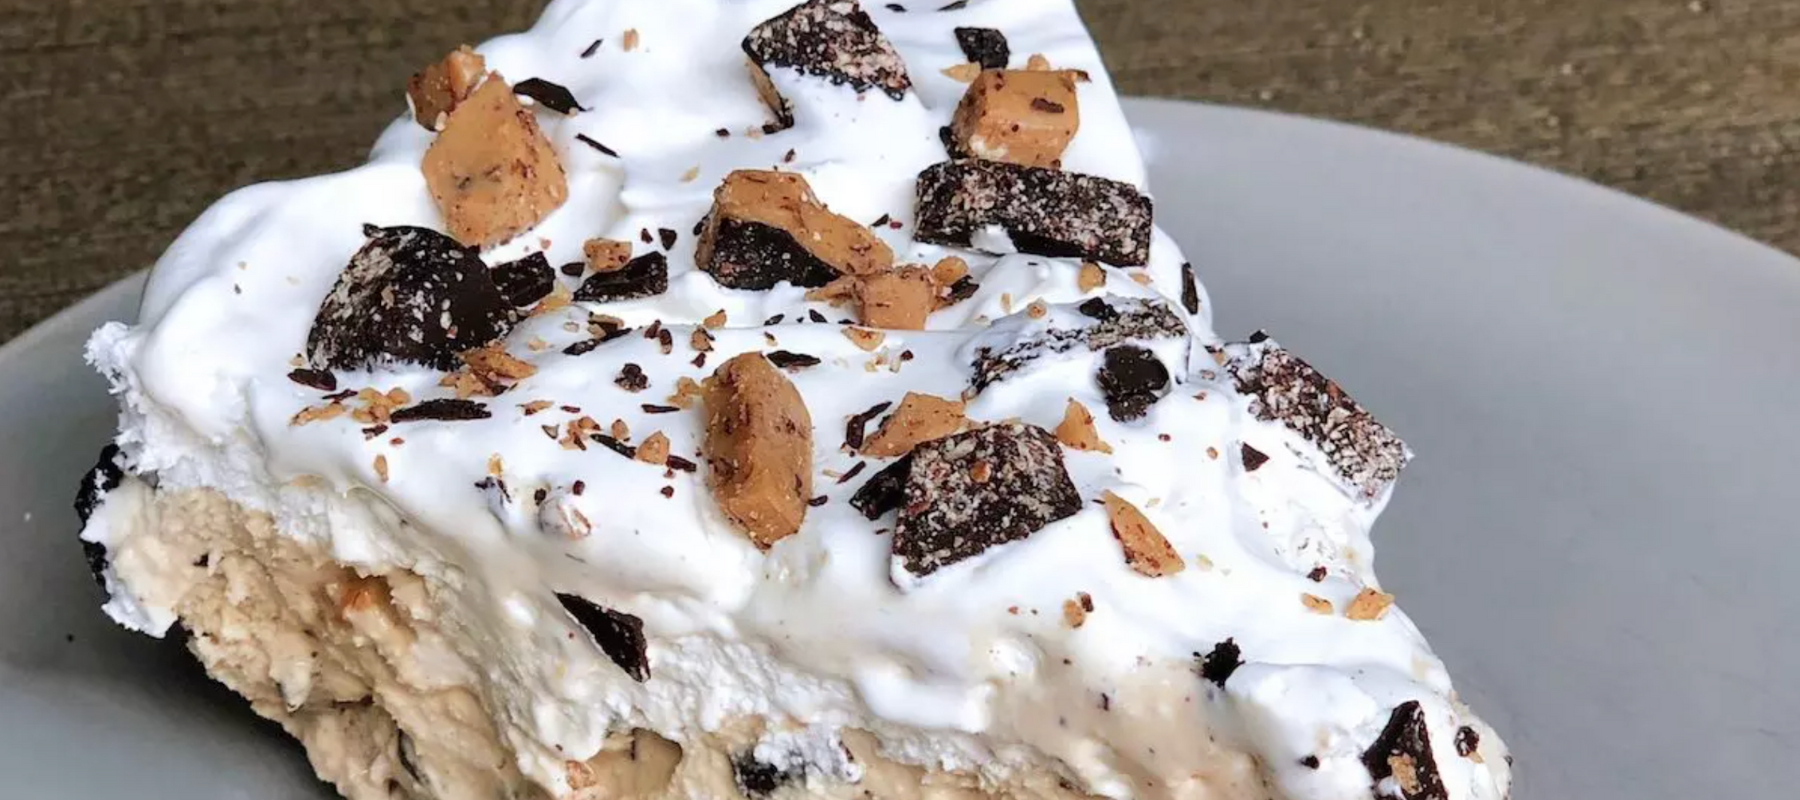 Griff's Toffee Ice cream pie topped with whipped cream, toffee, and chocolate pieces 